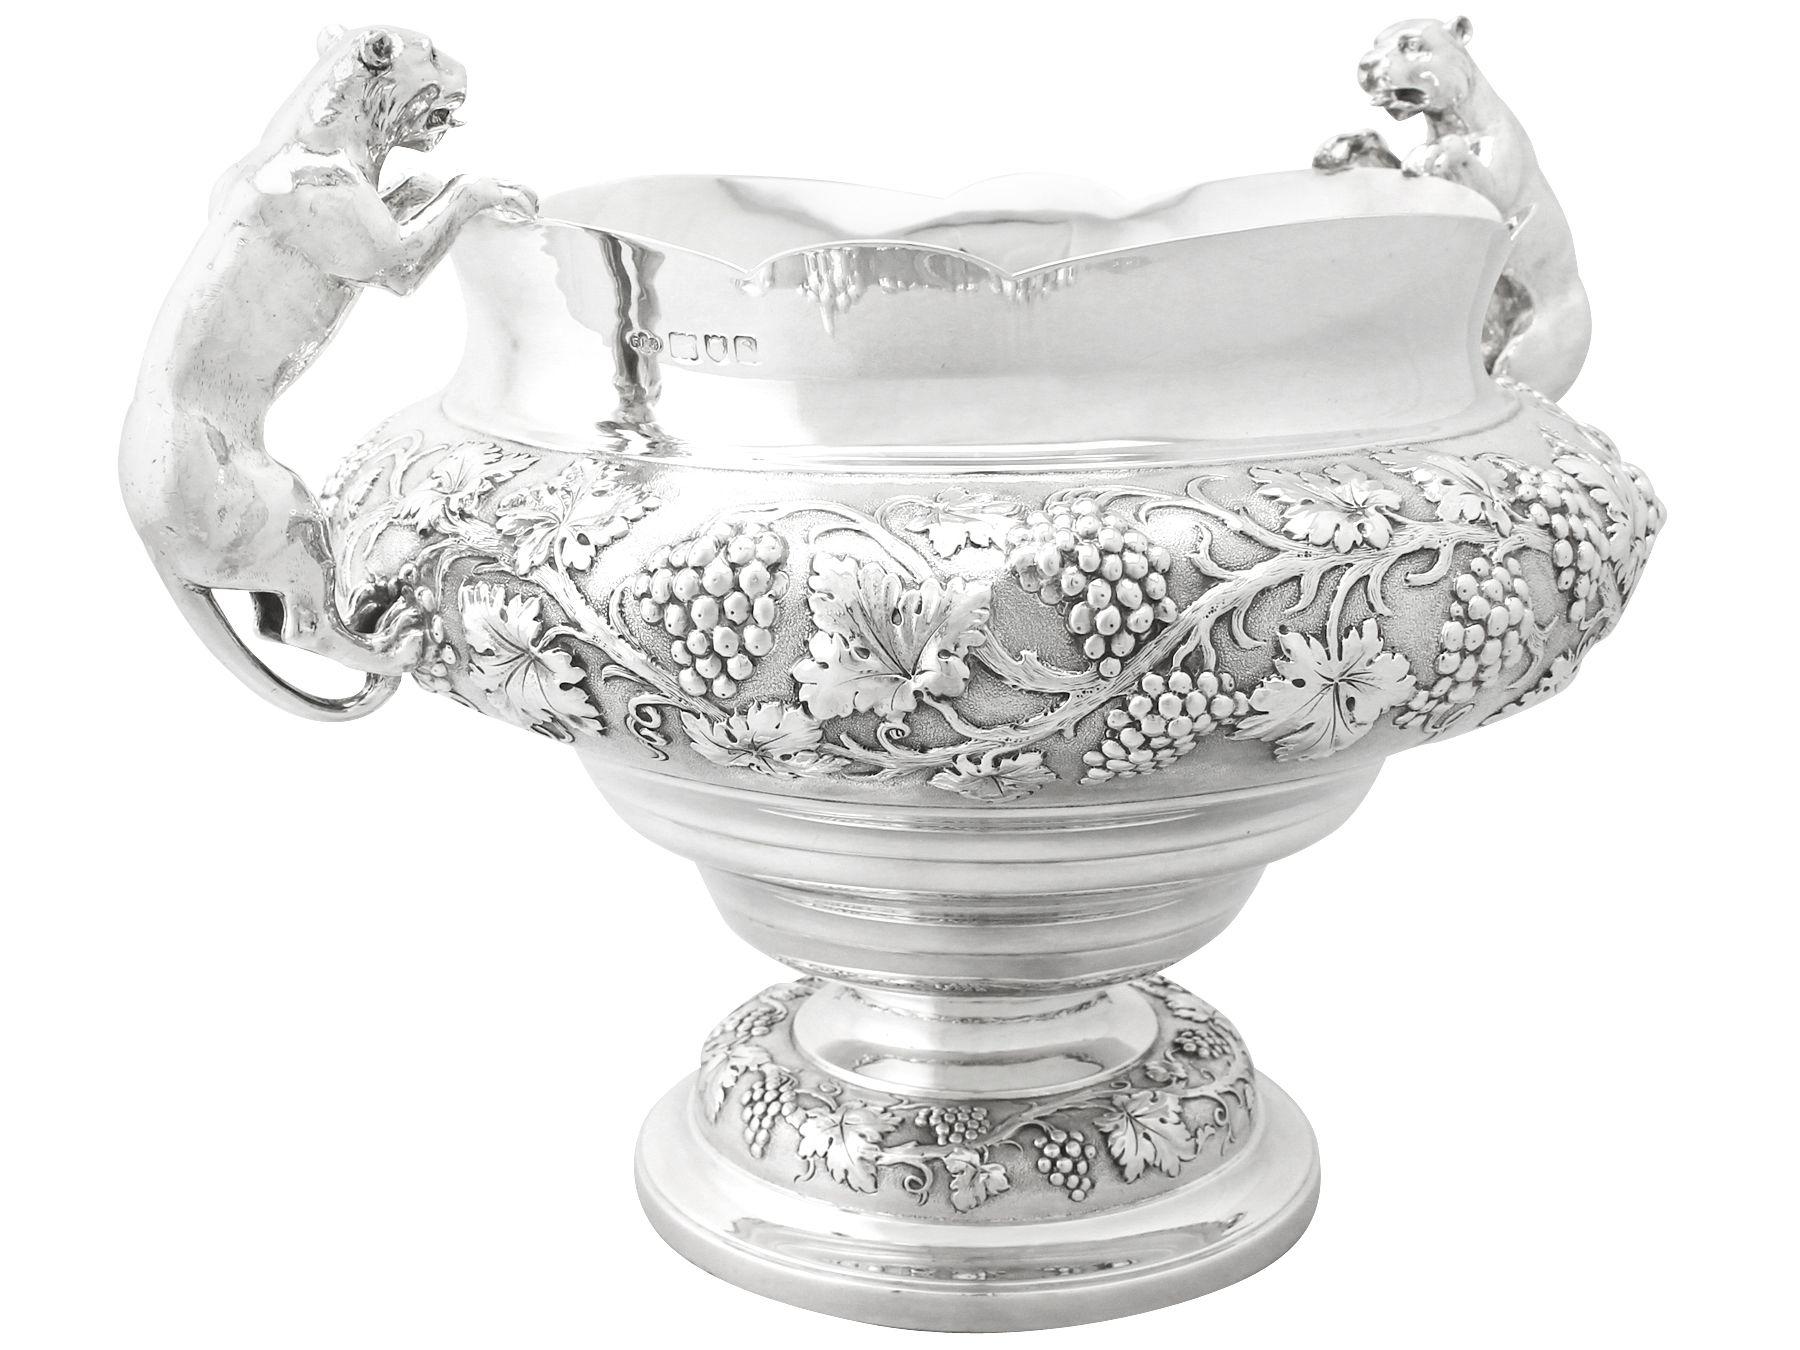 A magnificent, fine and impressive, large antique George V English sterling silver presentation bowl, an addition to our ornamental silverware collection.

This magnificent antique George V sterling silver, large silver decorative bowl has a plain